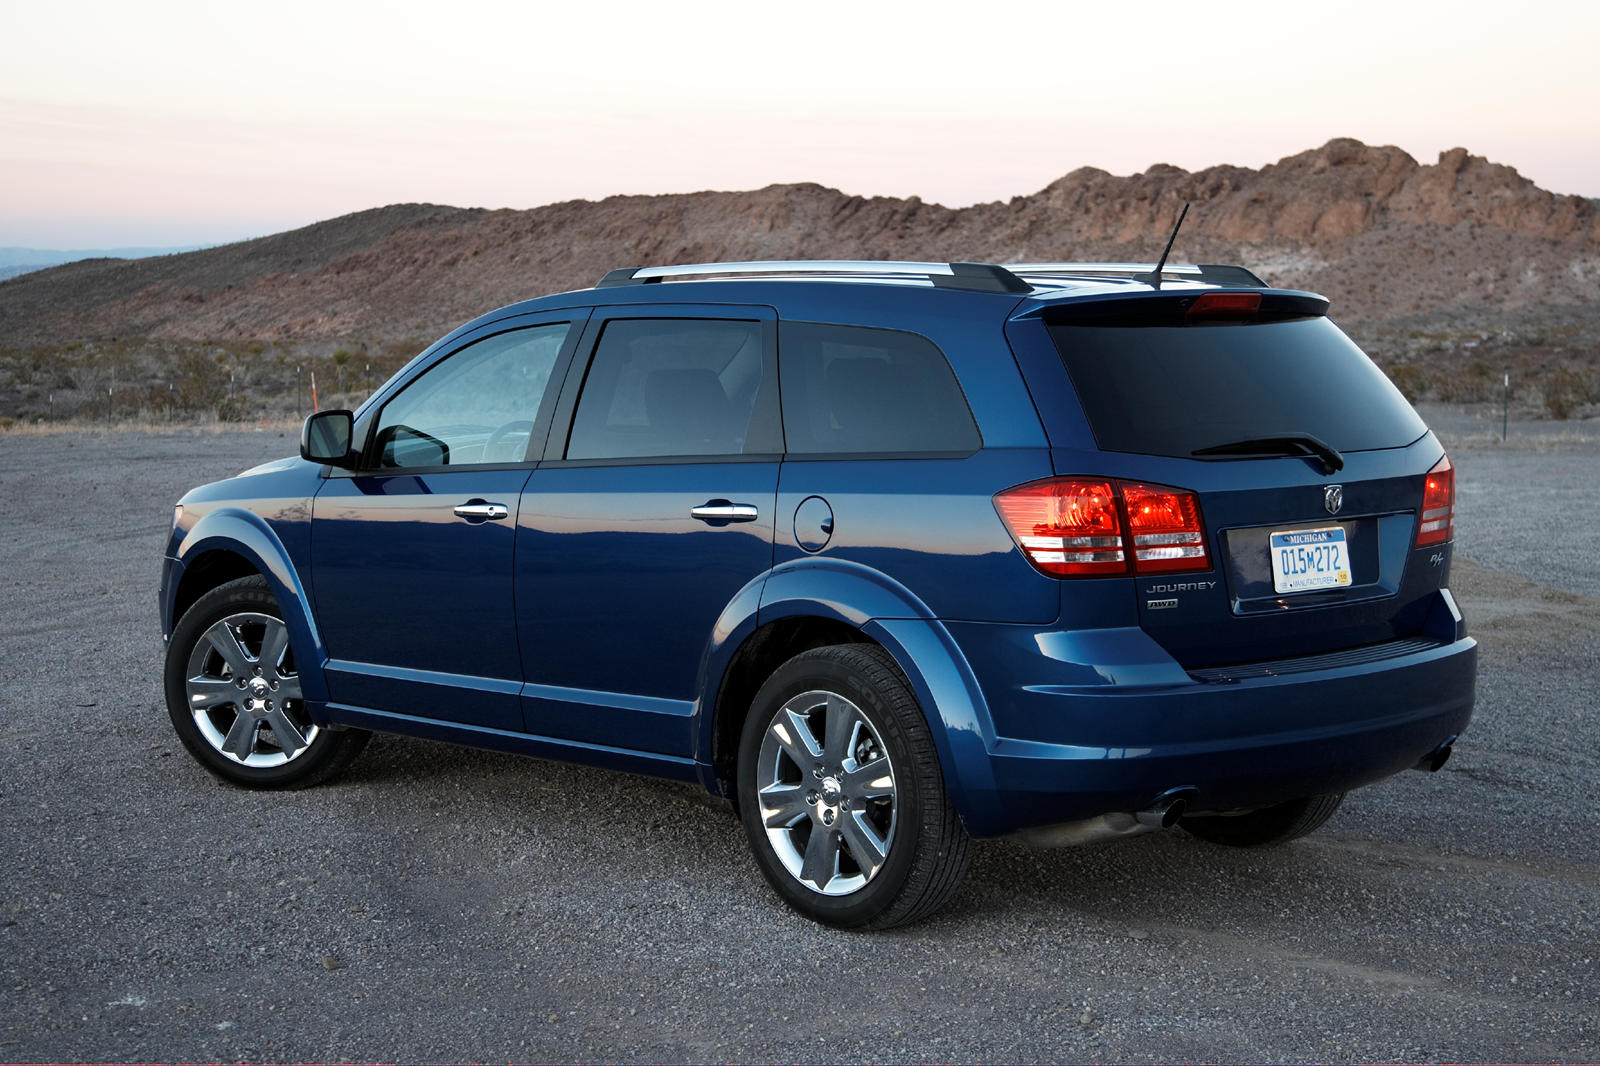 2010 dodge journey reviews consumer reports